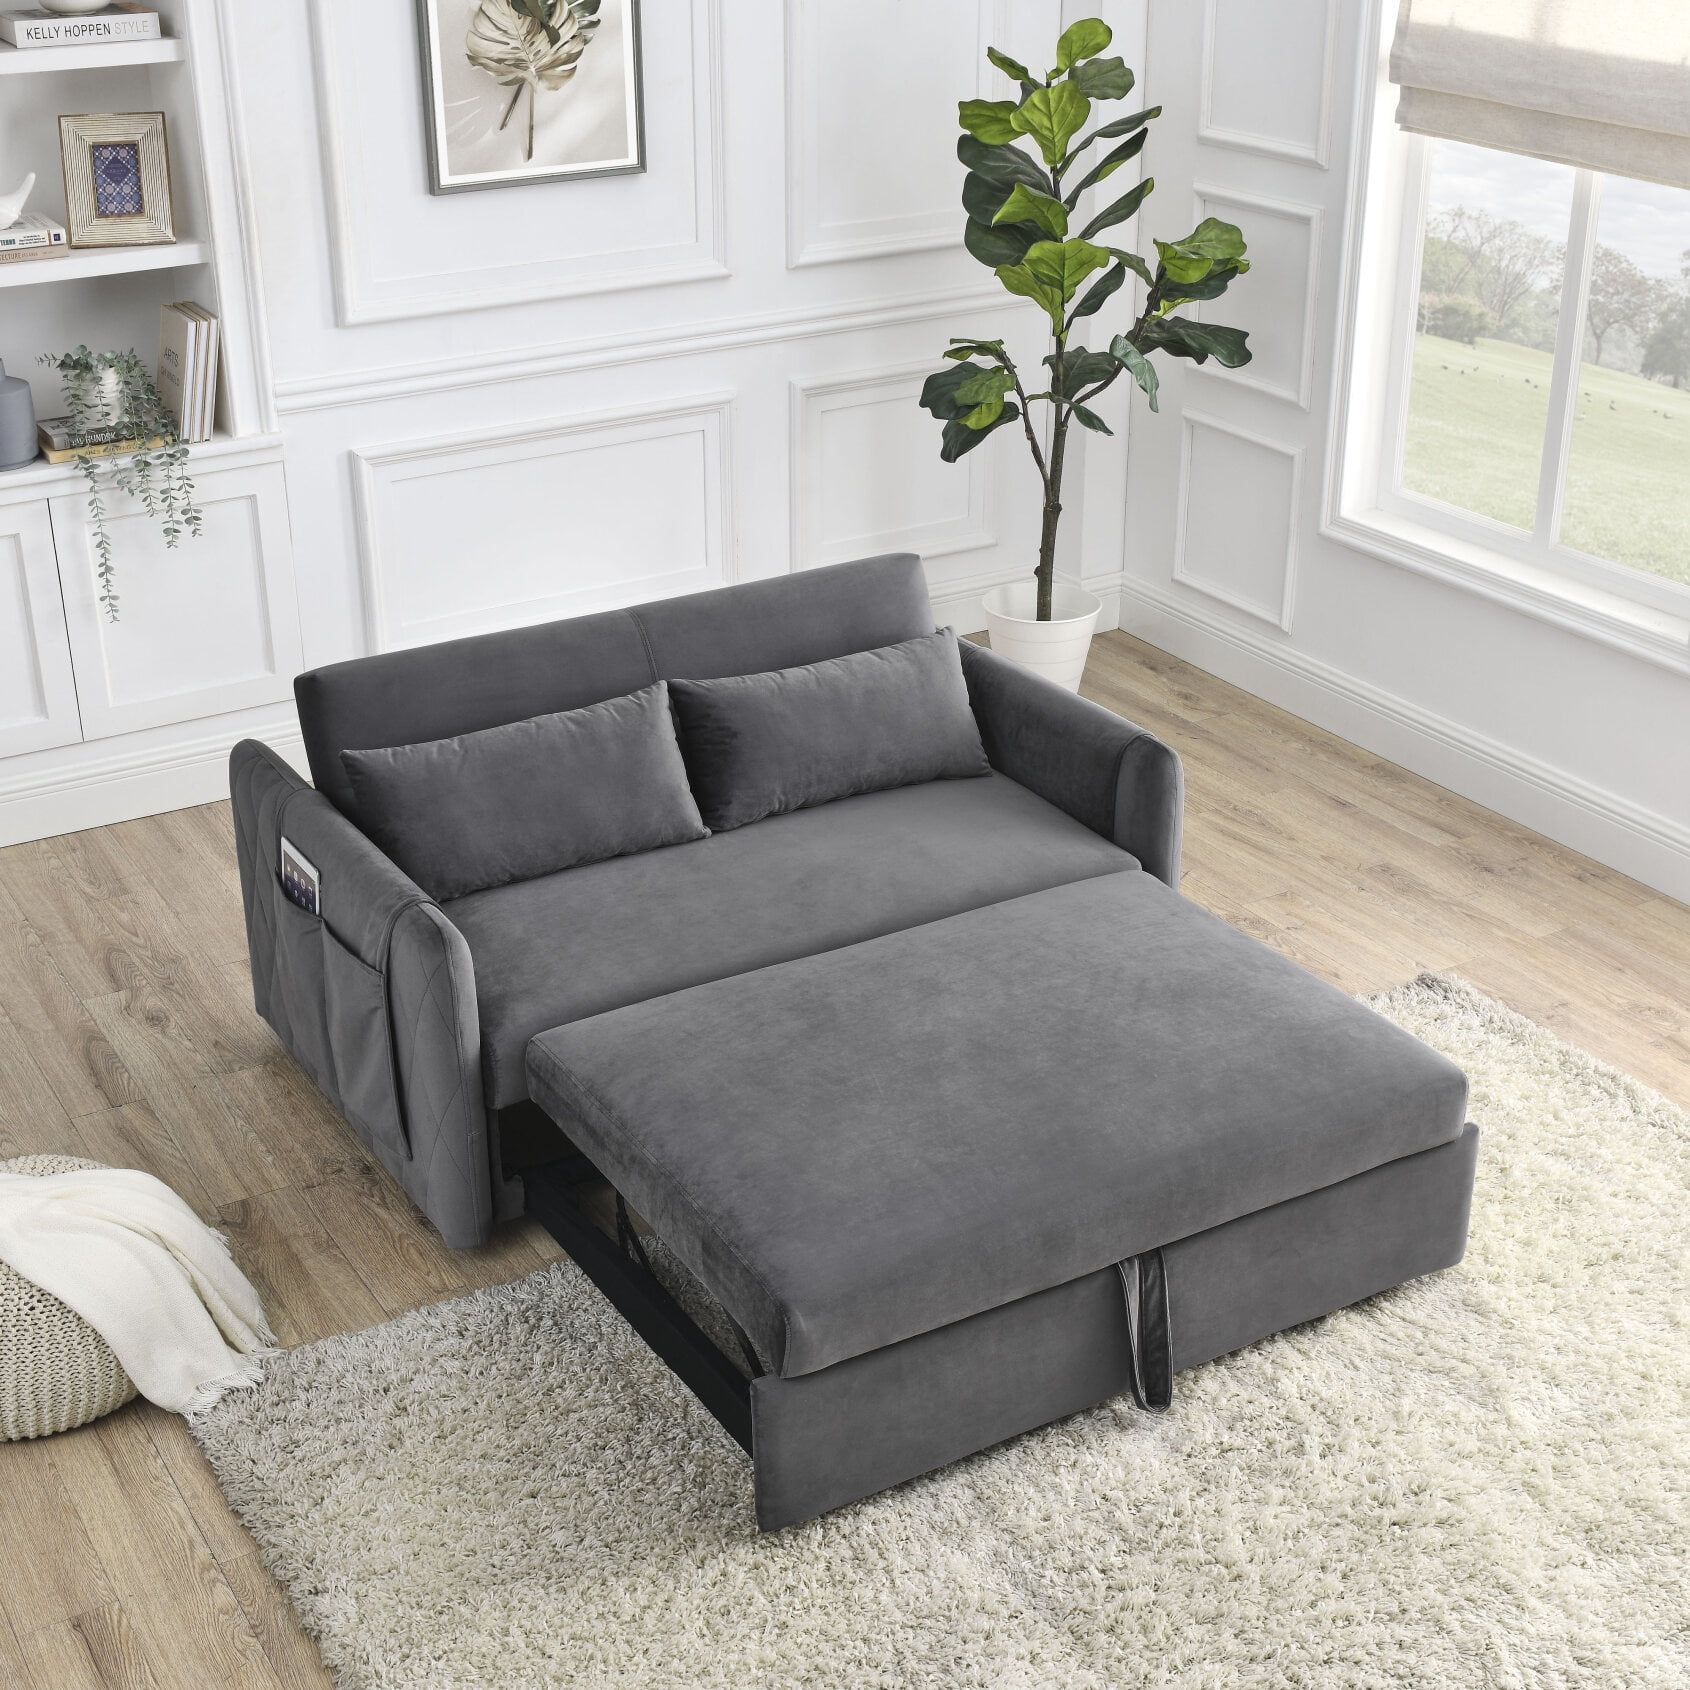 3 In 1 Convertible Sleeper Sofa Bed, Upholstered Pull Out Sofa With 2  Detachable Arm Pockets, Futon Sofa Bed With 2 Pillows And Adjustable  Backrest For Apartment Living Room – Walmart For 3 In 1 Gray Pull Out Sleeper Sofas (Photo 11 of 15)